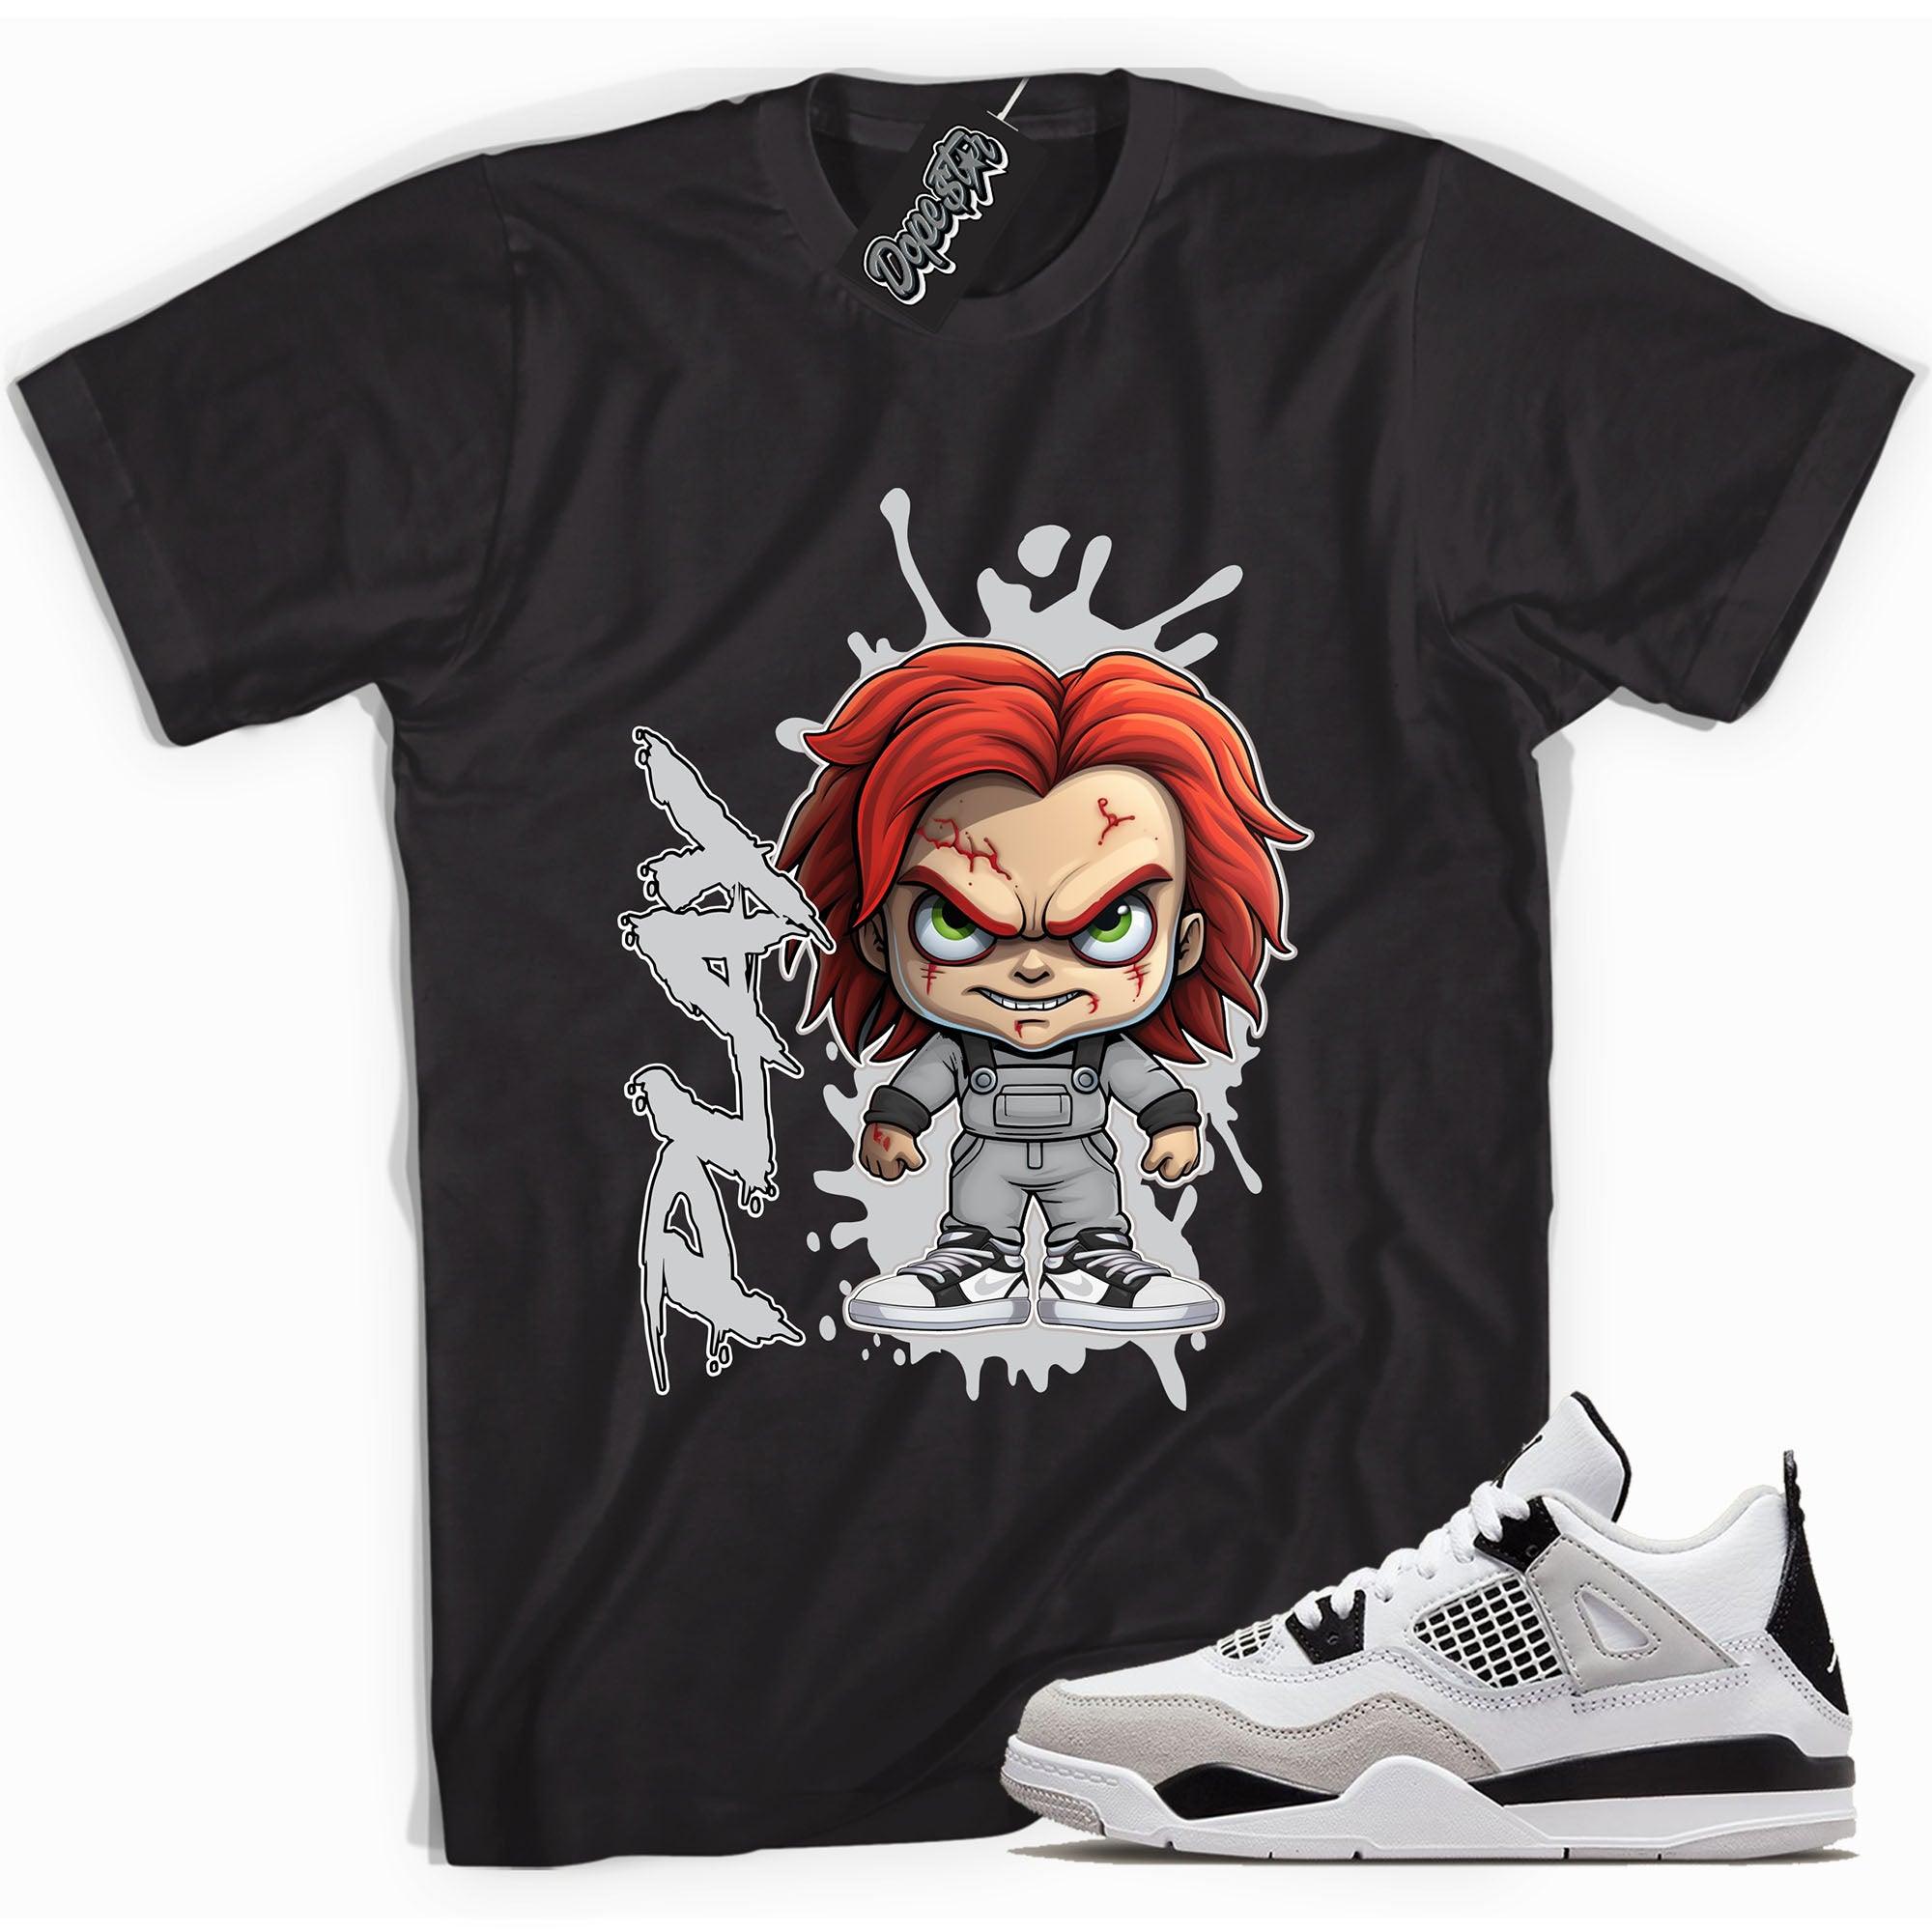 Cool Black Shirt With Chucky Play design That Perfectly Matches AIR JORDAN 4 RETRO MILITARY BLACK Sneakers.